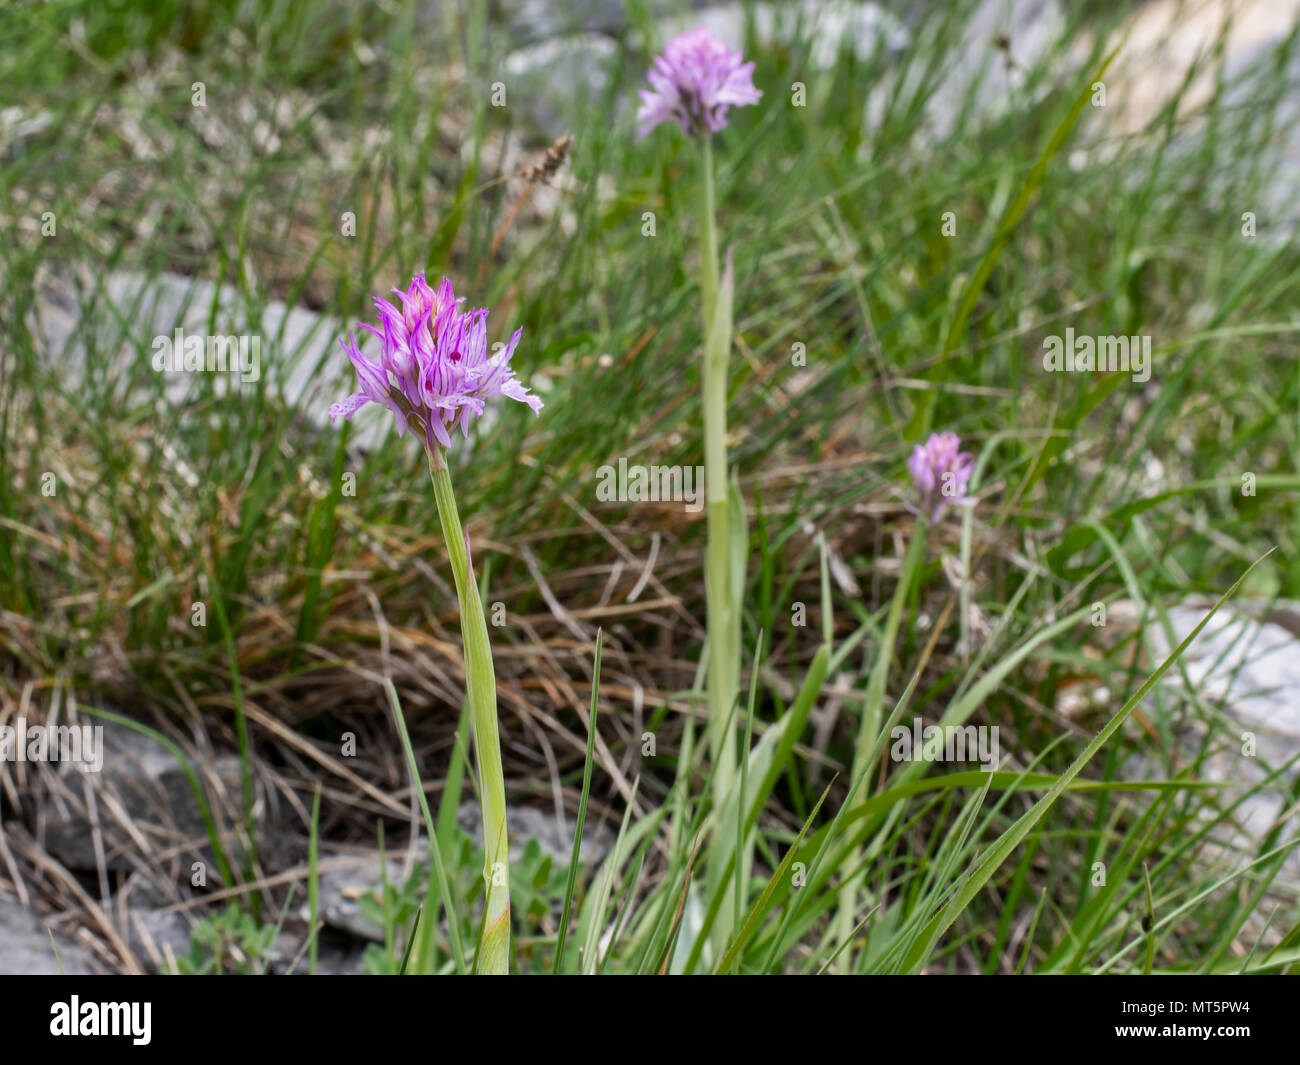 Neotinea tridentata (three-toothed orchid). Small pink wild orchid. Stock Photo